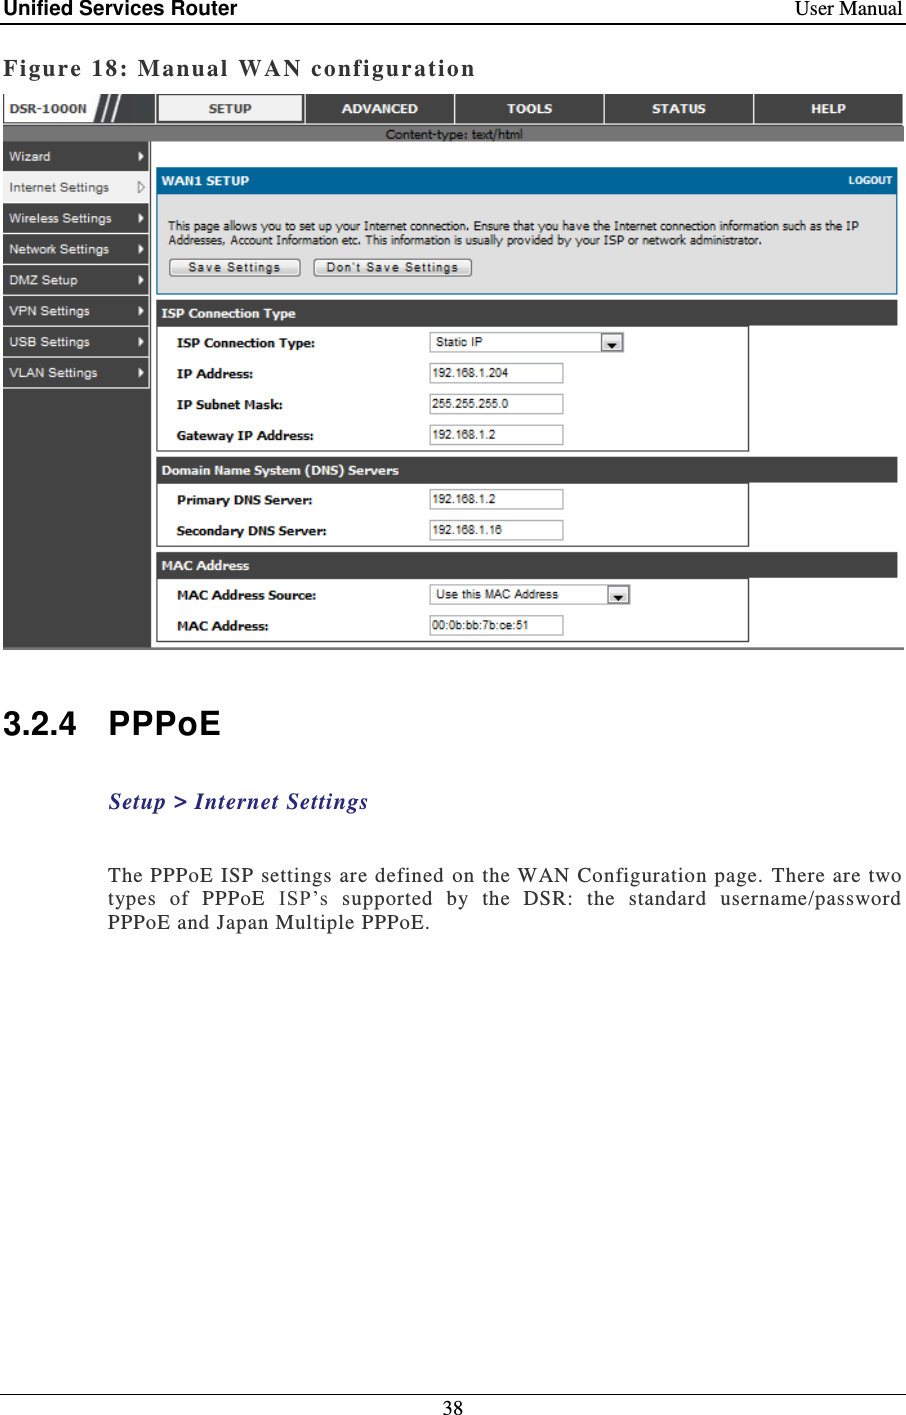 Unified Services Router    User Manual 38  Figure 18: Manual  WAN  configuration    3.2.4  PPPoE  Setup &gt; Internet Settings    The PPPoE  ISP settings are defined on the WAN Configuration page.  There are two types  of  PPPoE  ISP’s  supported  by  the  DSR:  the  standard  username/password PPPoE and Japan Multiple PPPoE.    